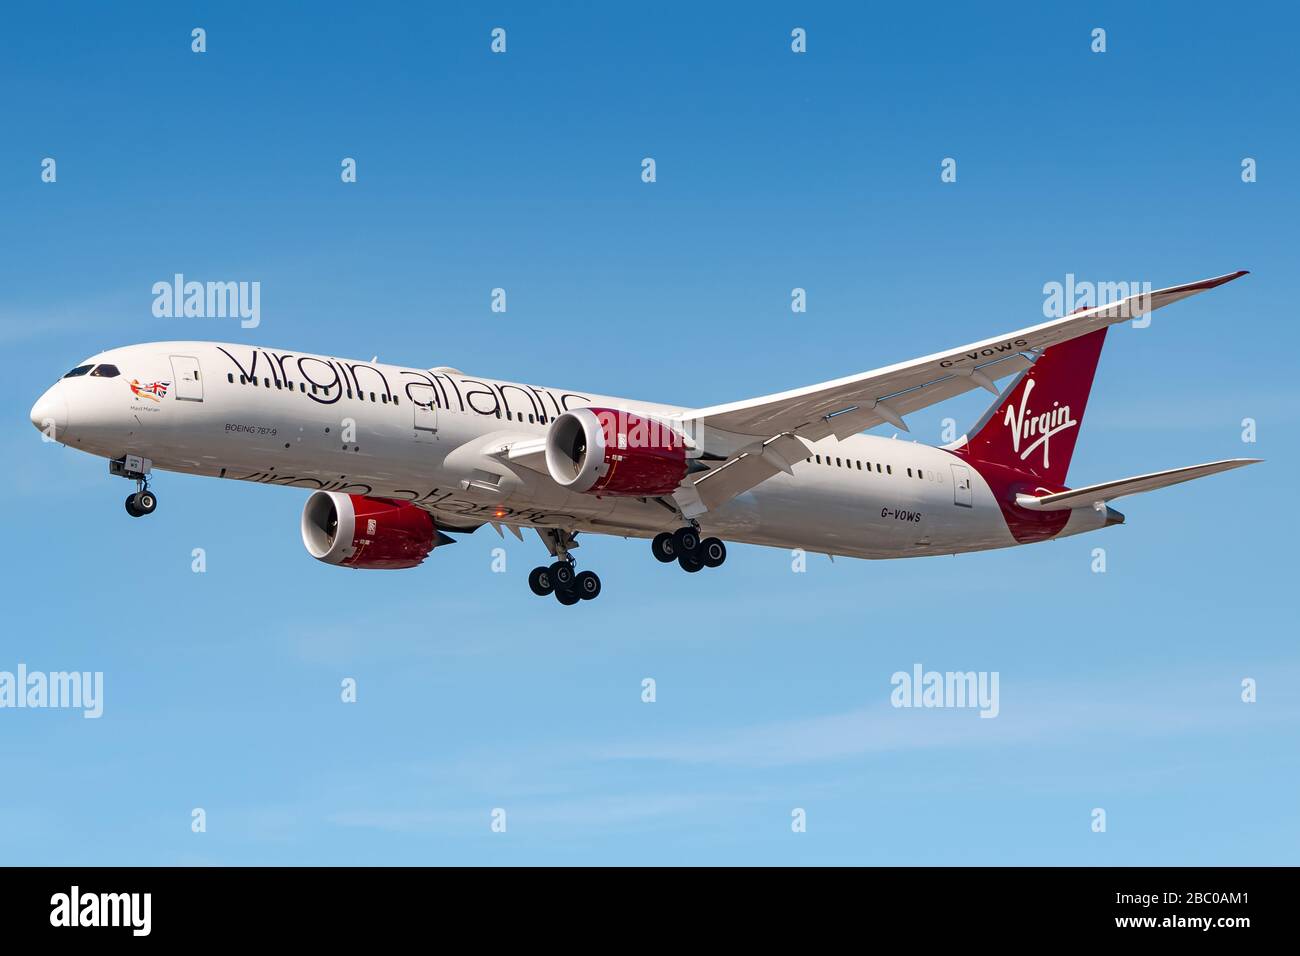 London, United Kingdom - August 1, 2018: Virgin Atlantic Boeing 787 airplane at London Heathrow airport (LHR) in the United Kingdom. Boeing is an airc Stock Photo